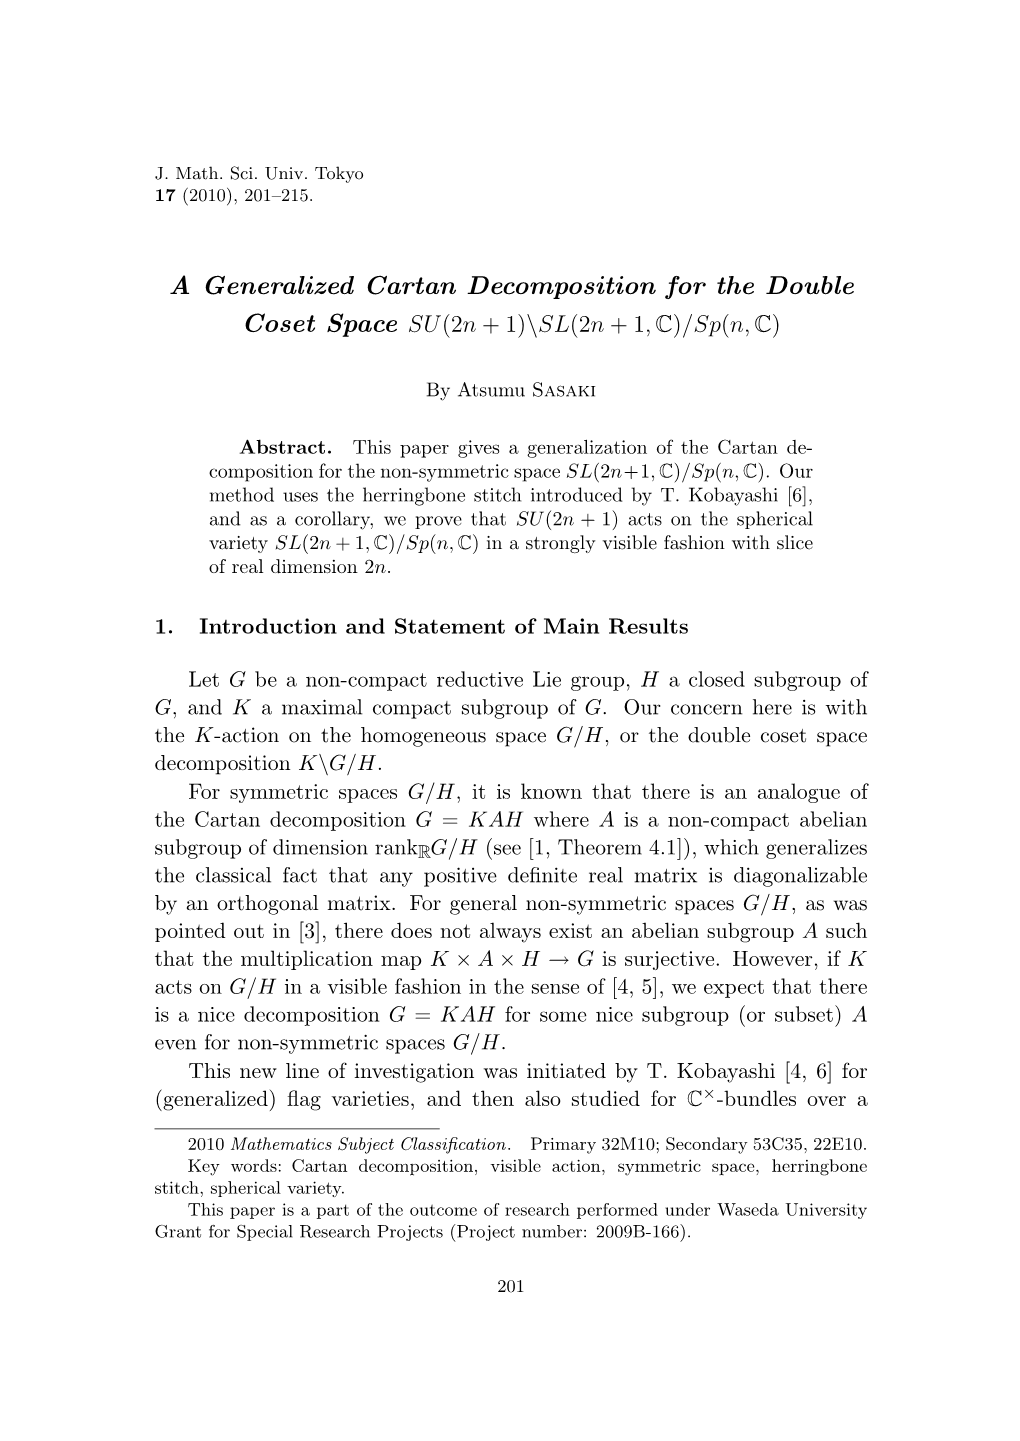 A Generalized Cartan Decomposition for the Double Coset Space SU(2N + 1)